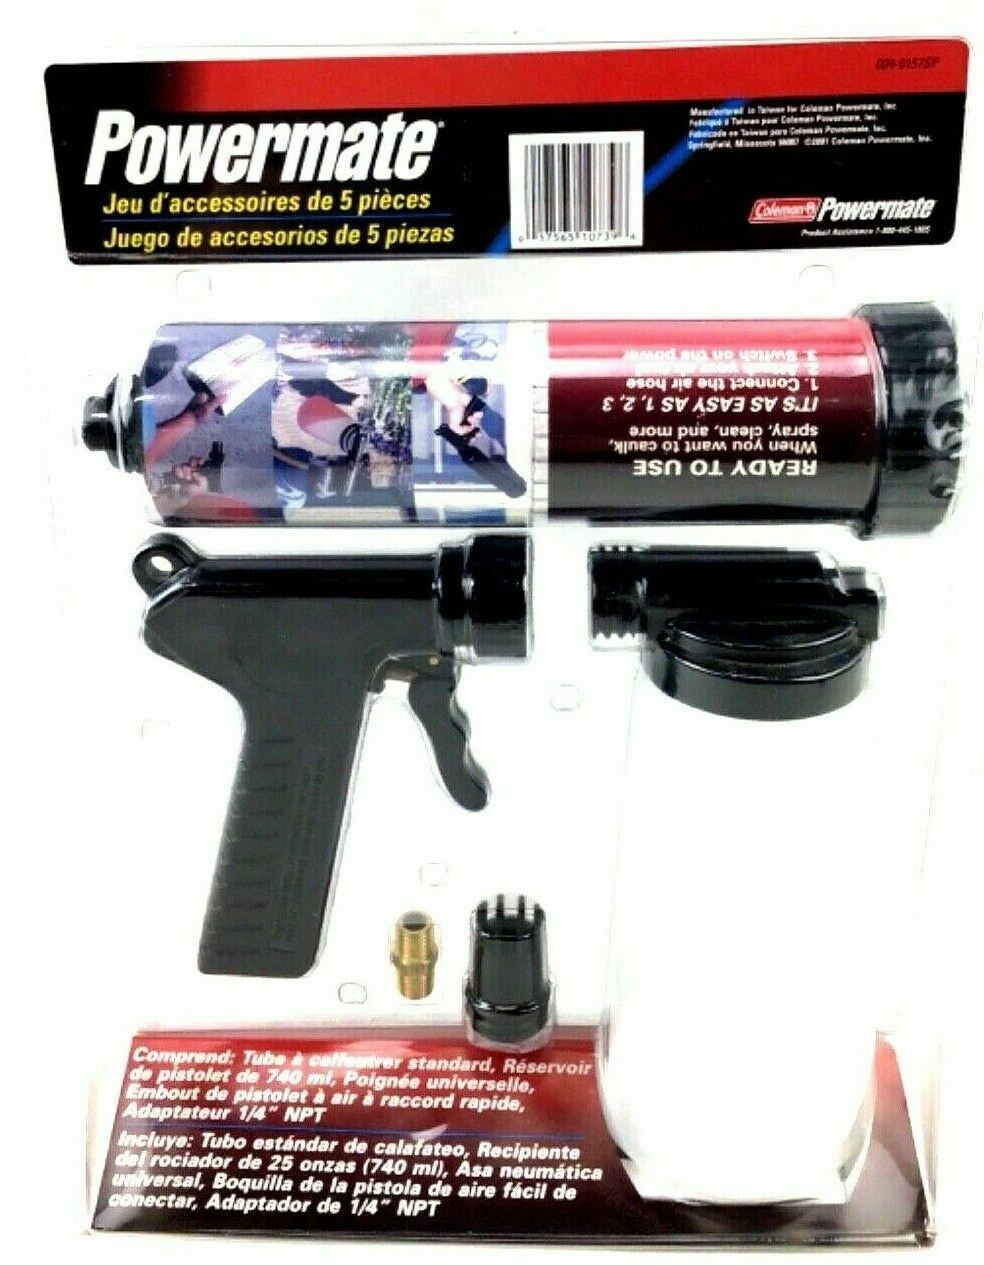 Powermate 5 Piece Accessory Kit For Caulk, Clean, Spray & More Ready To Use Tool